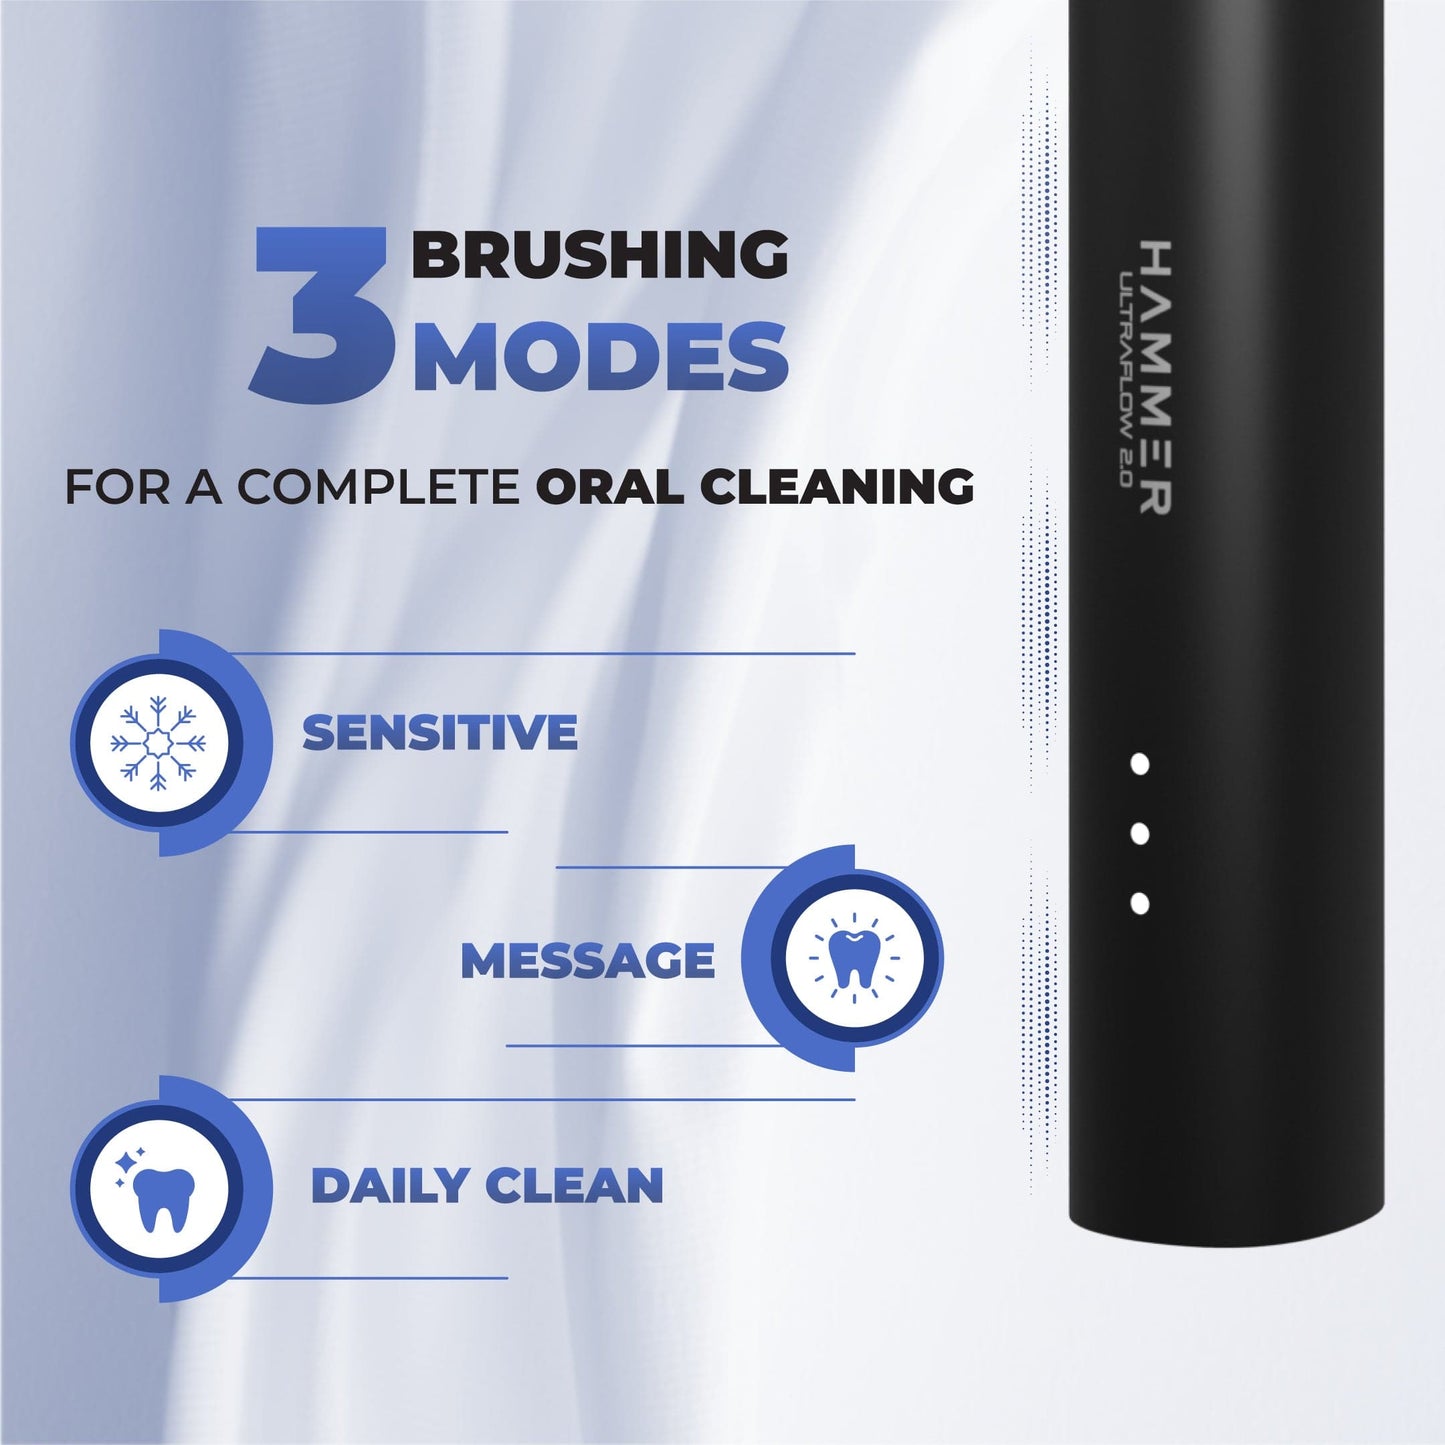 Hammer Ultra Flow 2.0 Premium Electric Toothbrush with 2 Replaceable Brush Heads